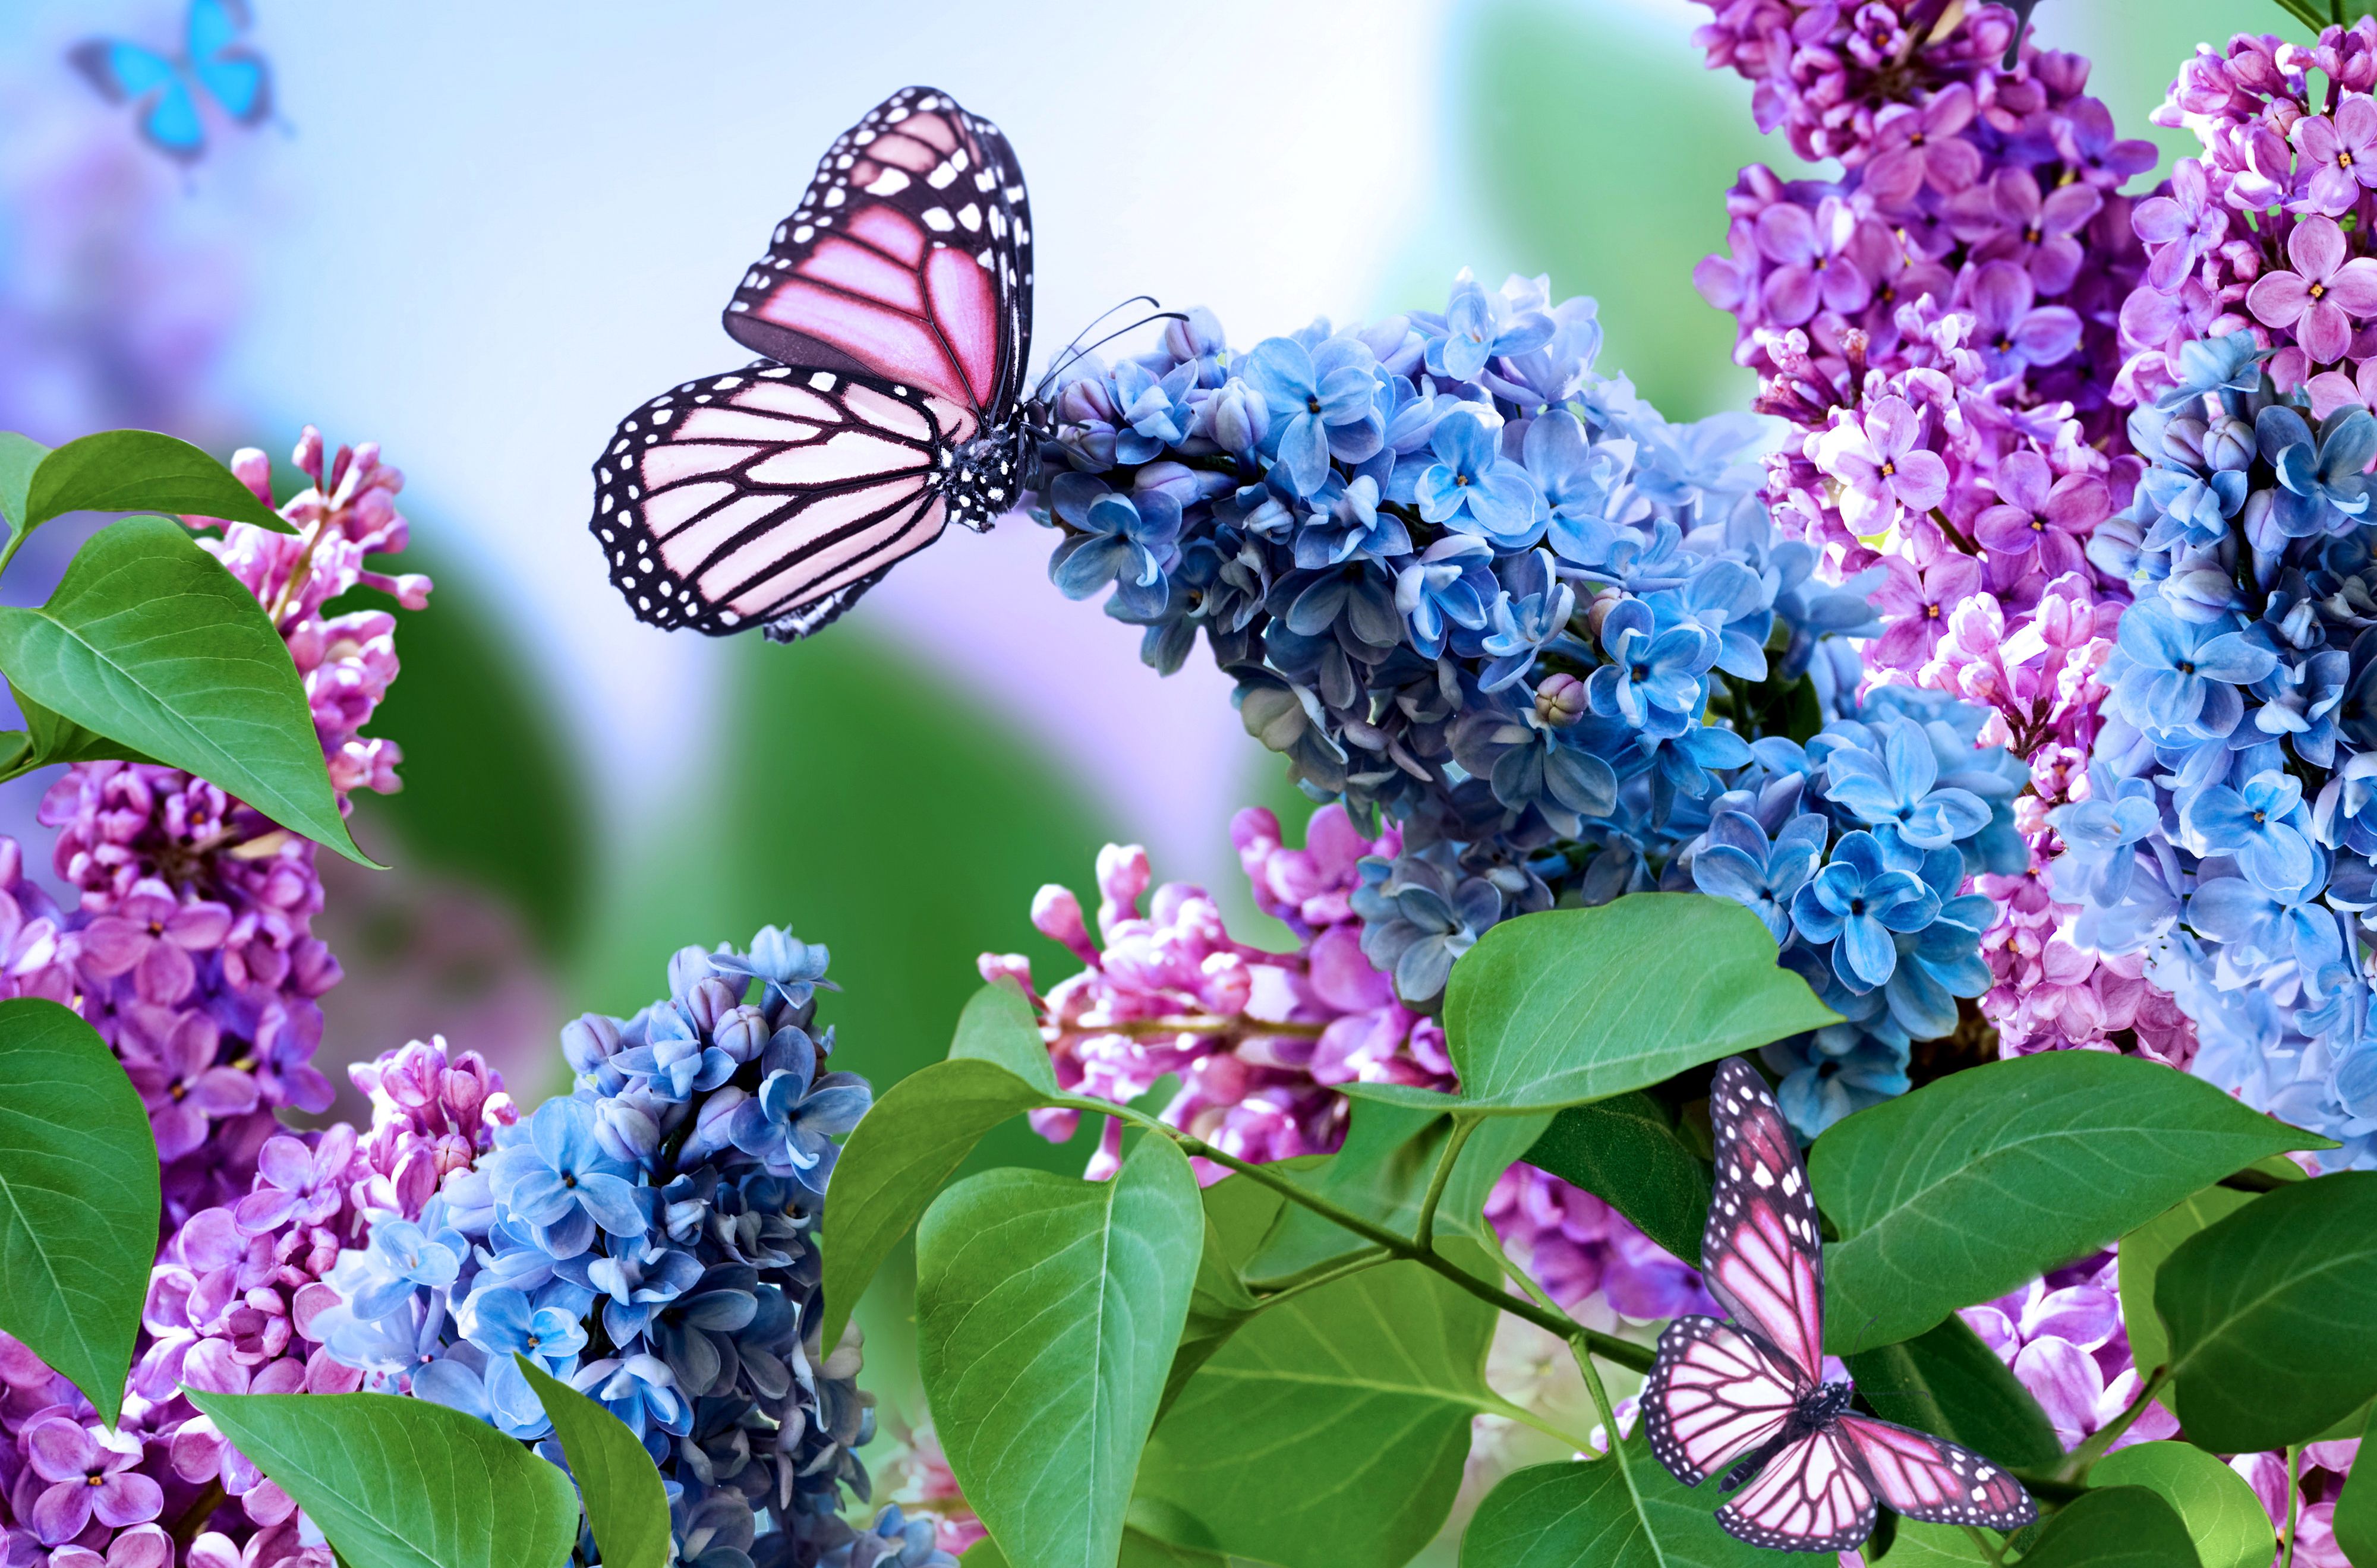 Wallpaper Insects Butterflies Lilac animal Closeup 4000x2639